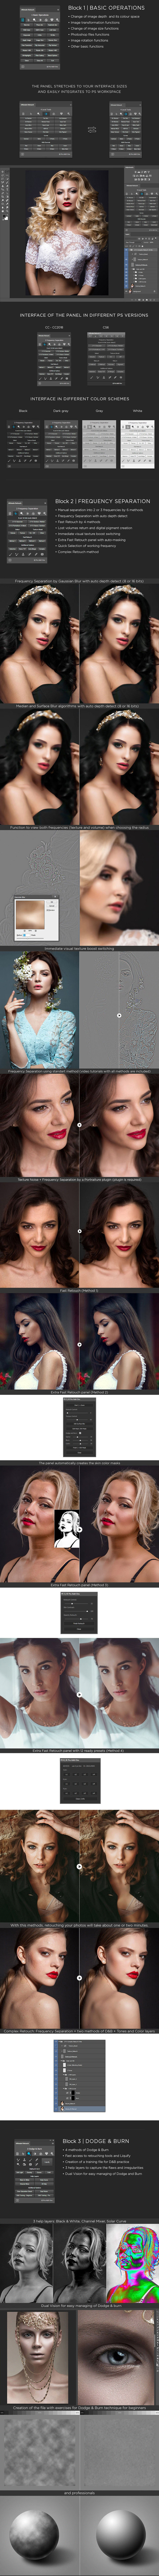 The Ultimate Retouch Panel